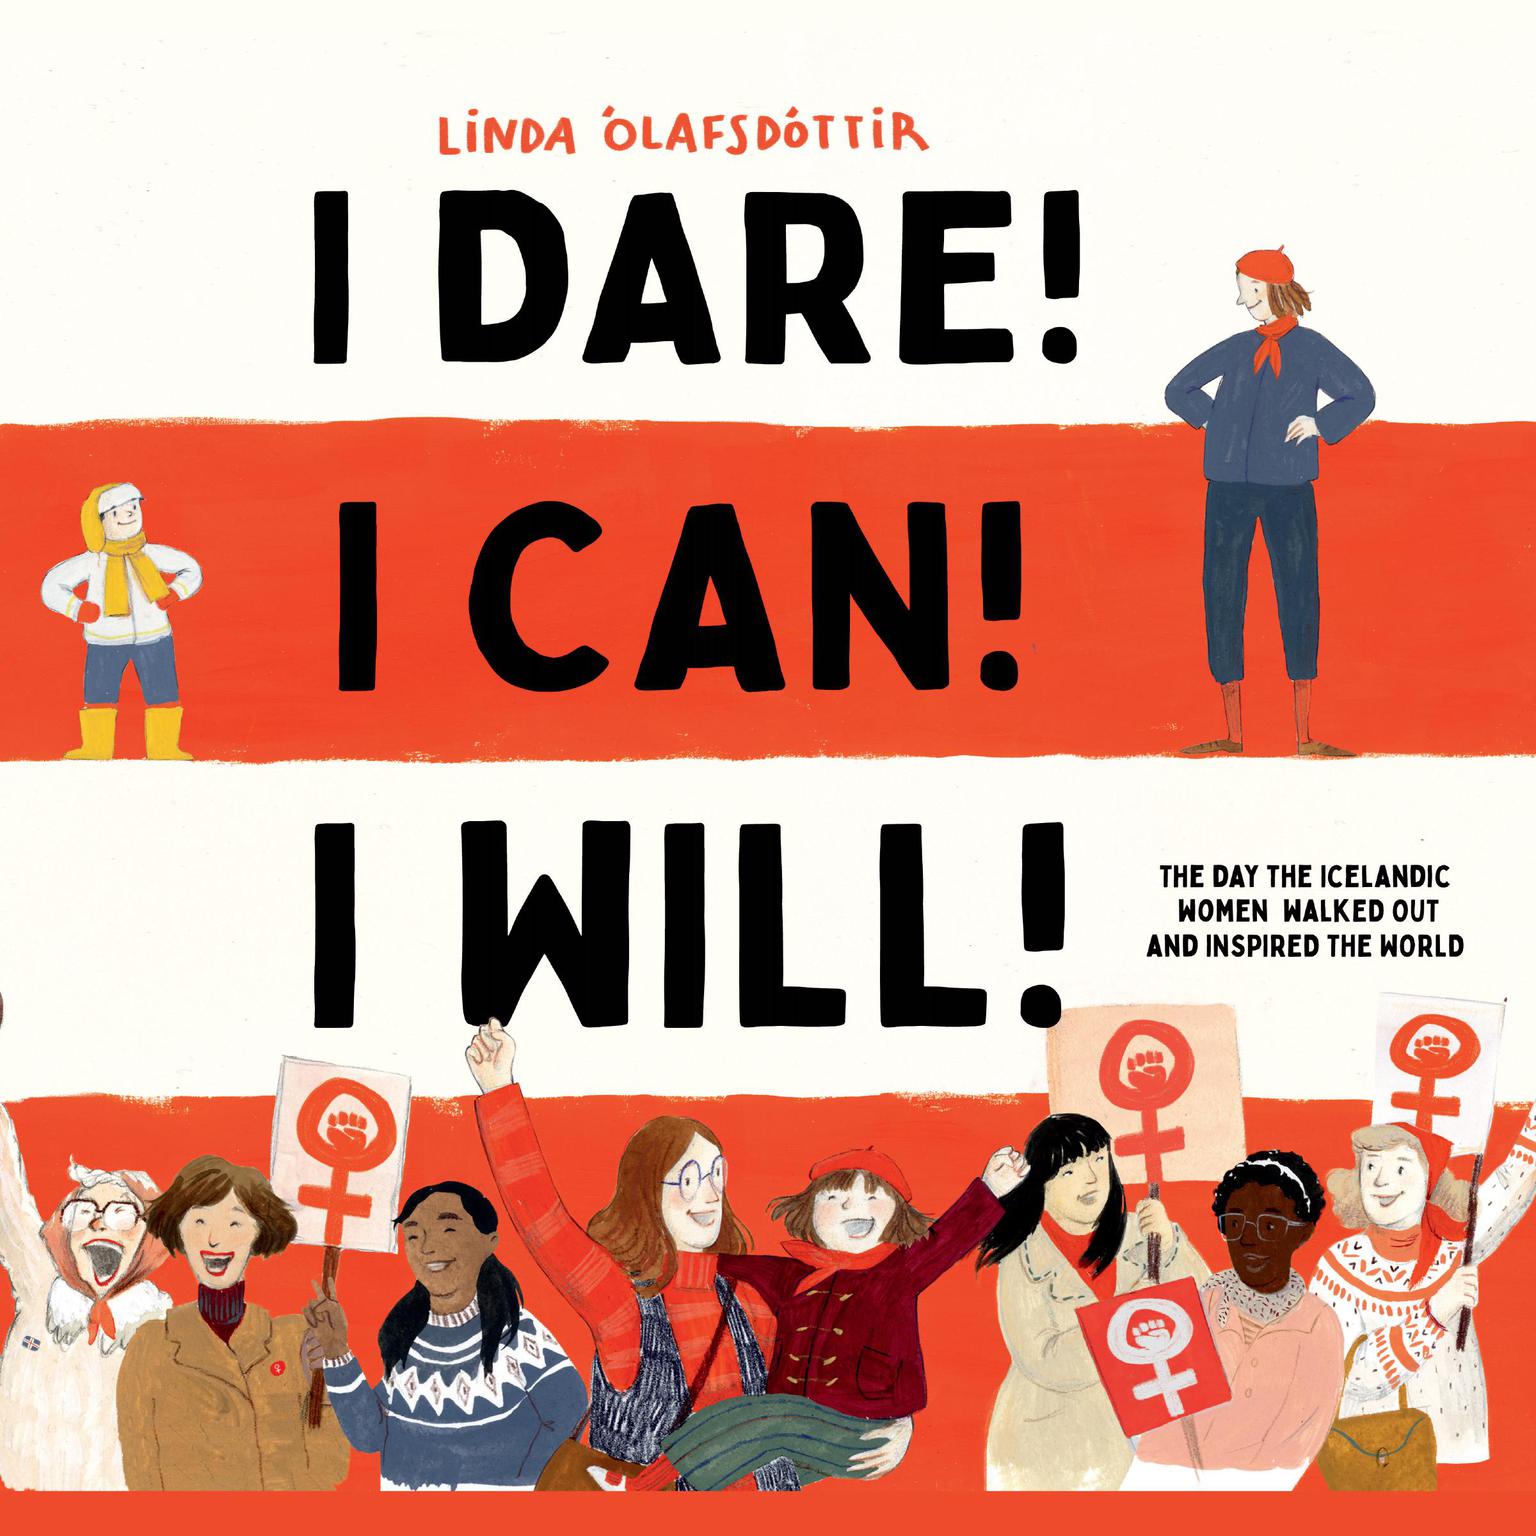 I Dare! I Can! I Will!: The Day the Icelandic Women Walked Out and Inspired the World Audiobook, by Linda Ólafsdóttir